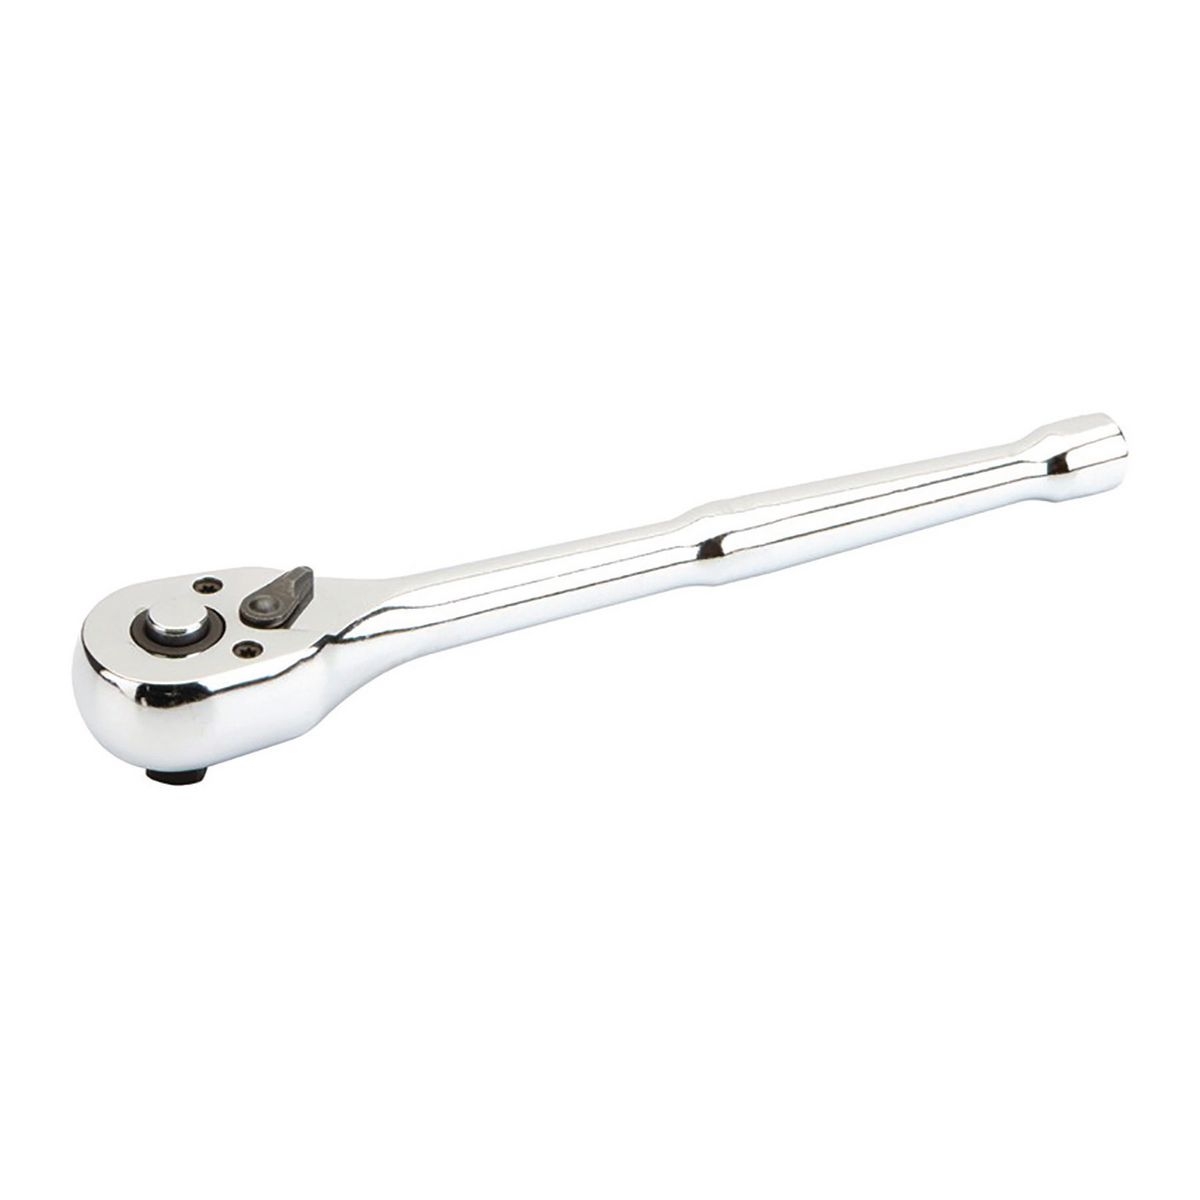 PITTSBURGH 1/4 in. Drive Quick Release Ratchet - Item 62175 / 40592 / 62245 / 69349